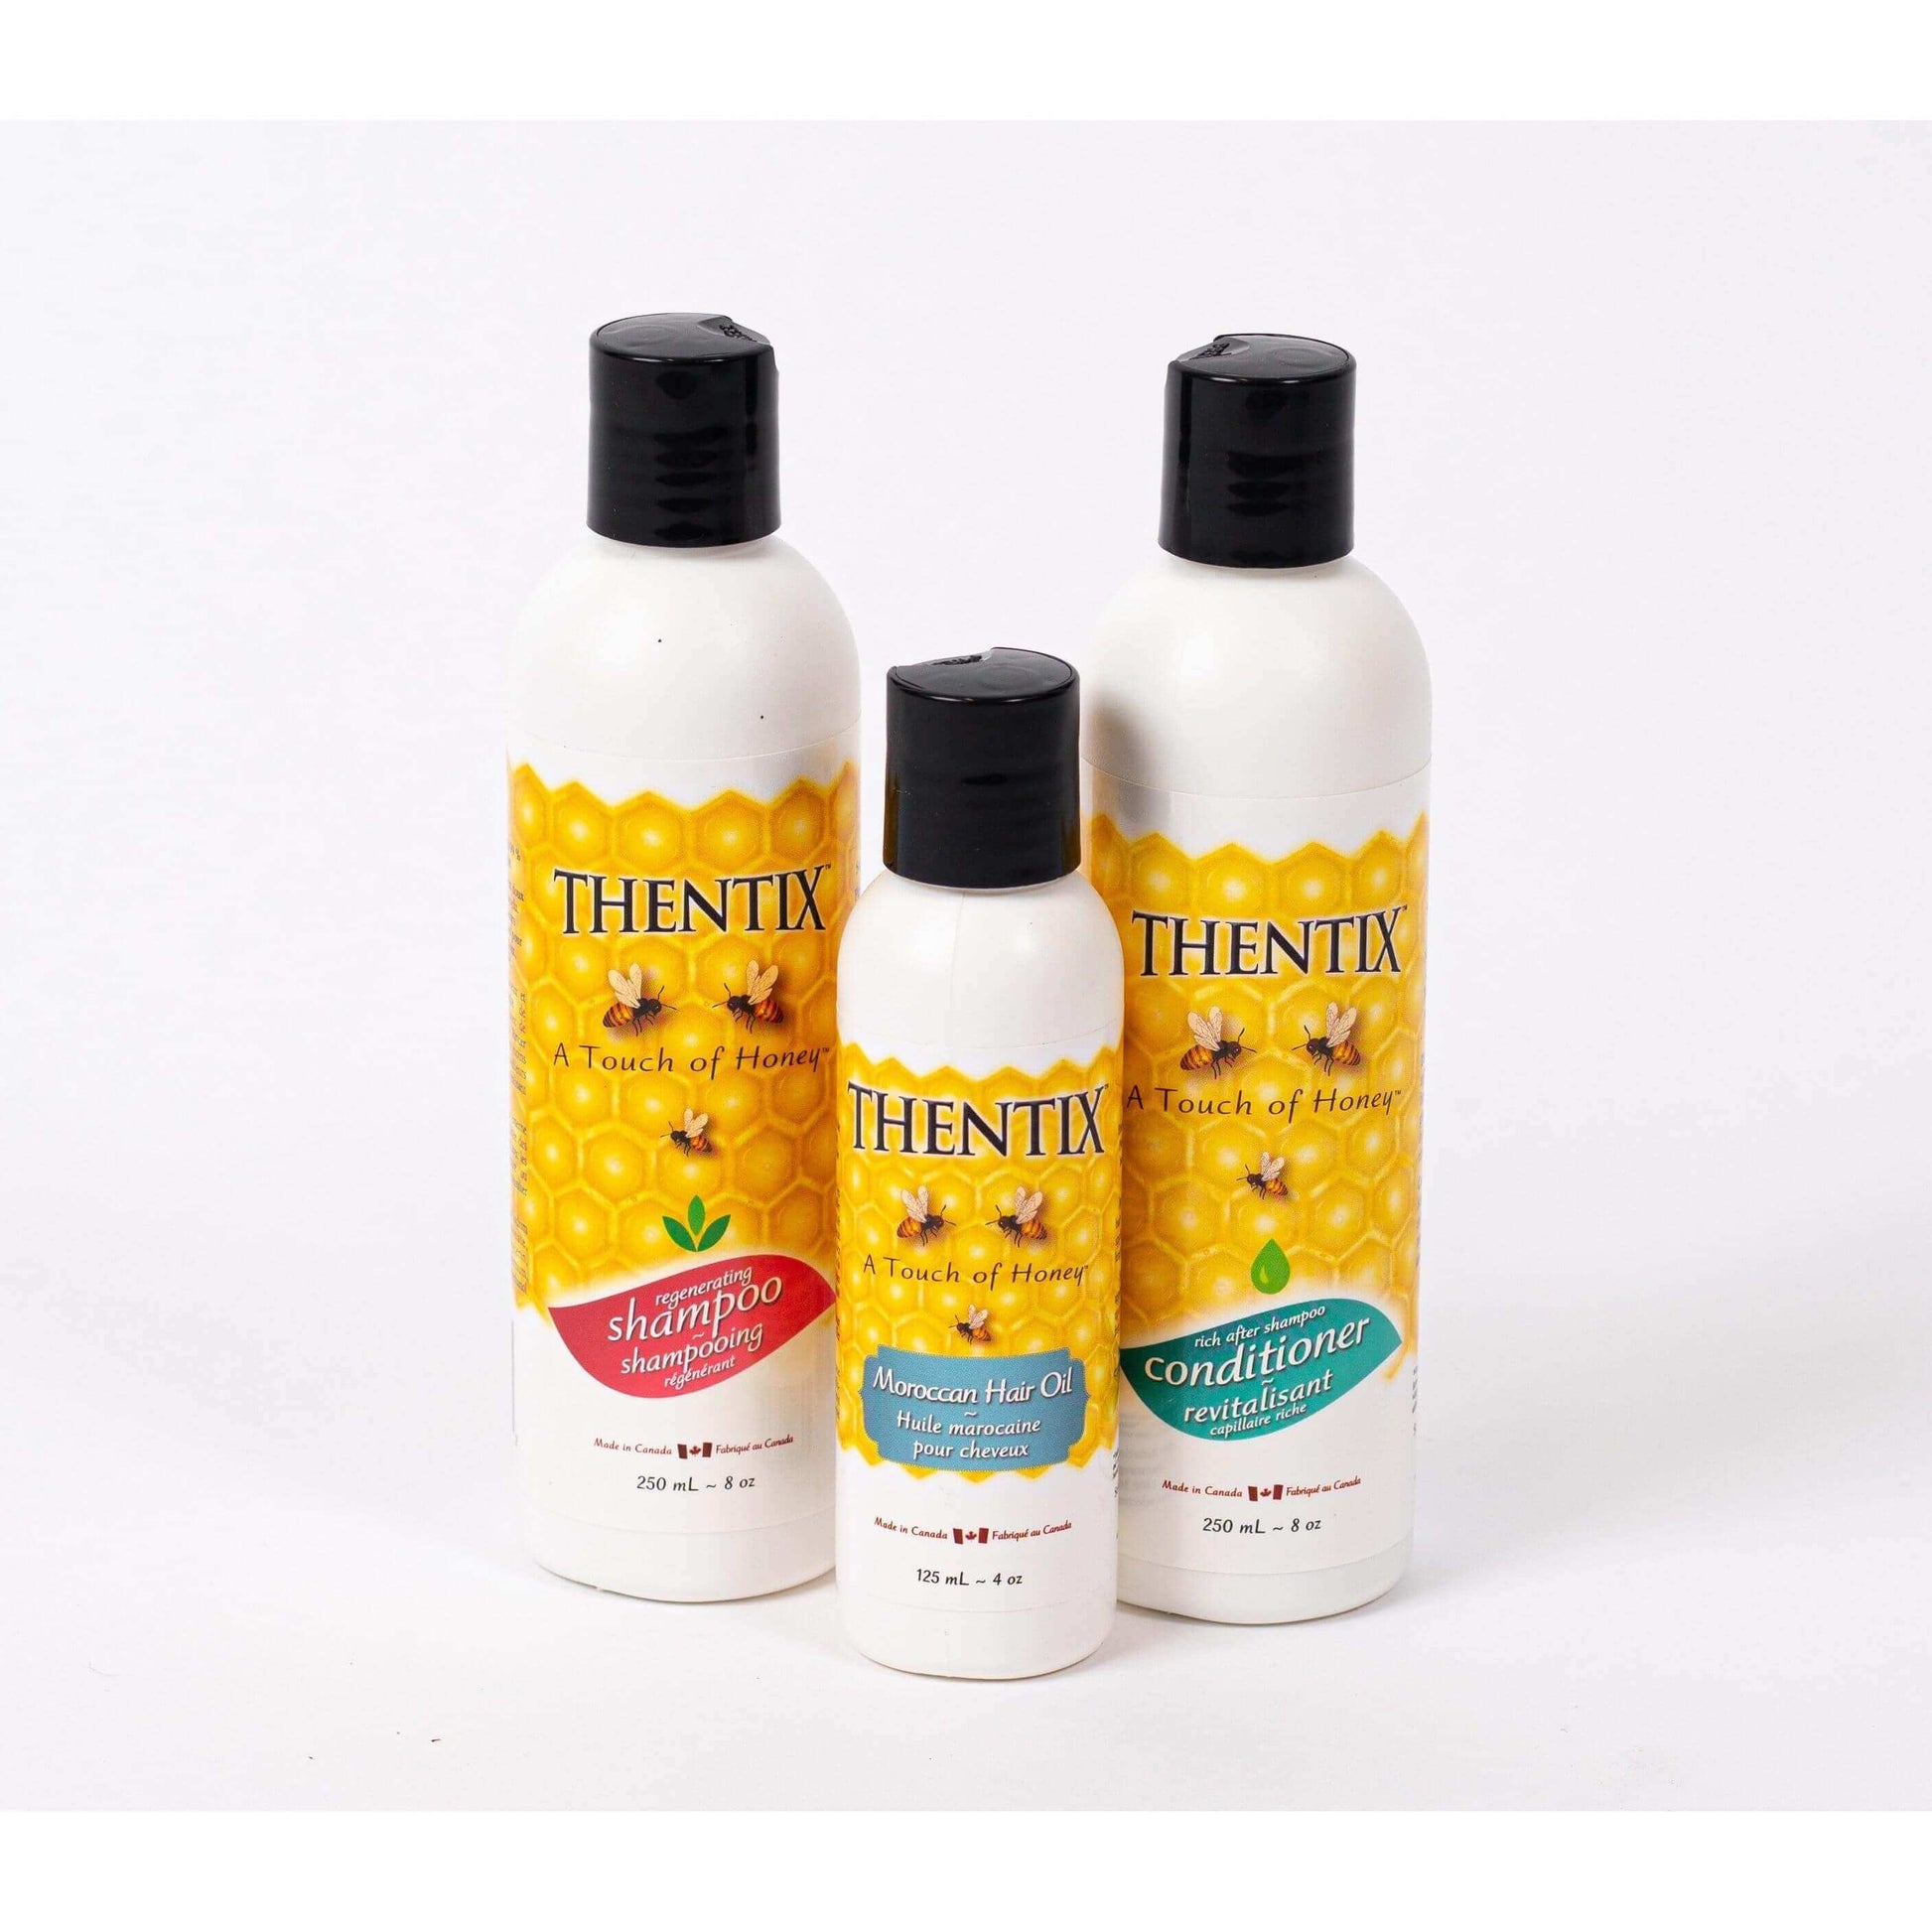 Although Thentix is well known for their hair care products, their skin conditioner is also highly effective, providing intense hydration and nourishment to dry hair.